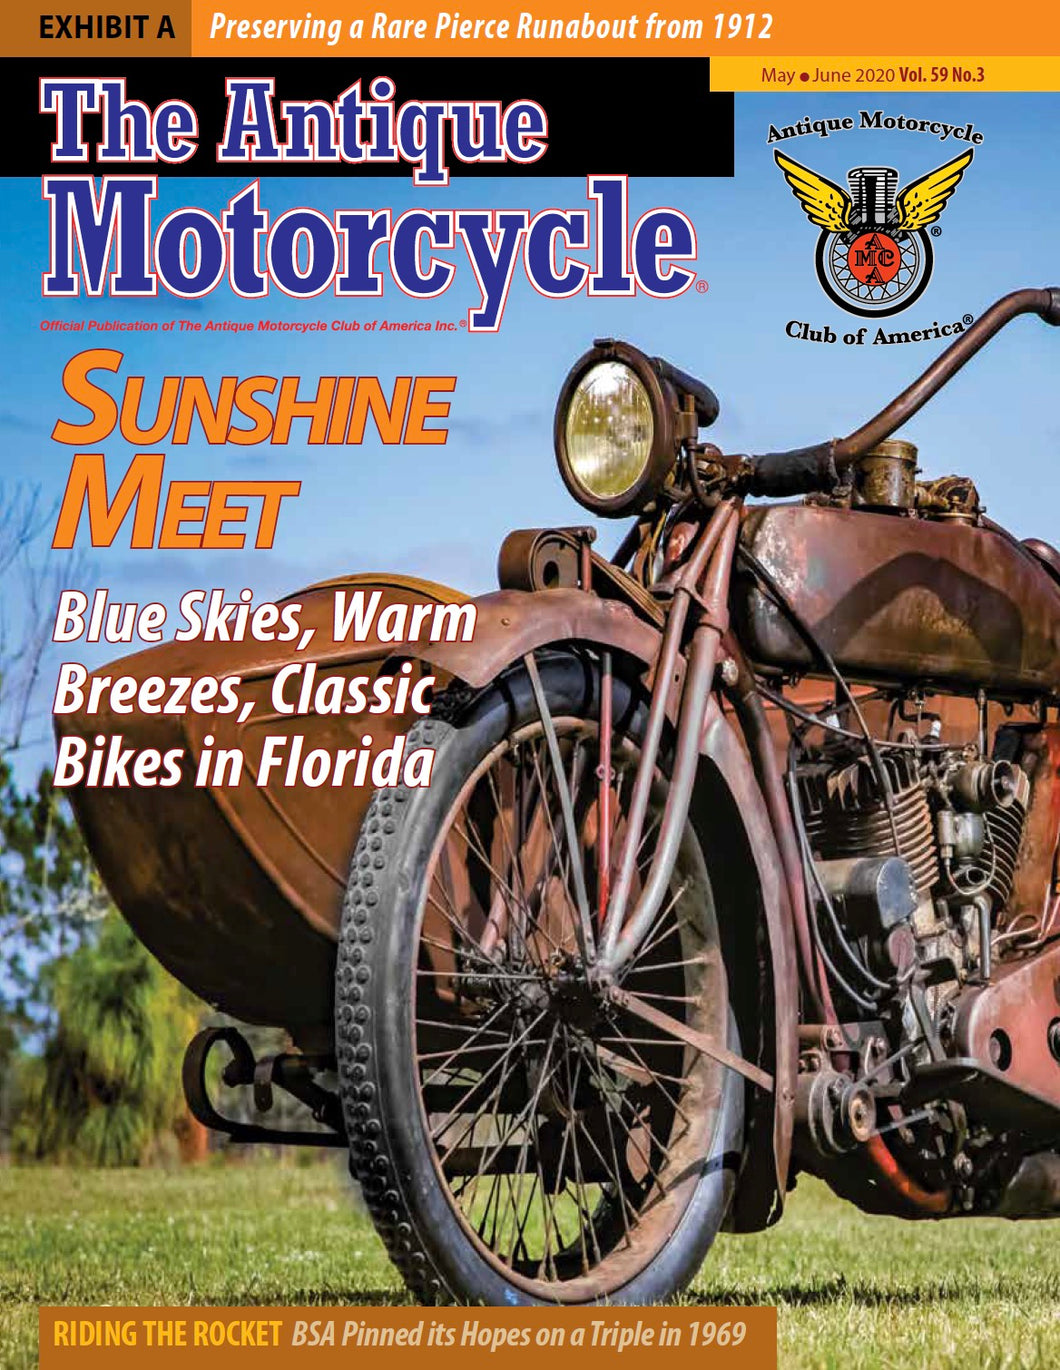 The Antique Motorcycle: Vol. 59, Iss. 3 - May/Jun 2020 Magazine